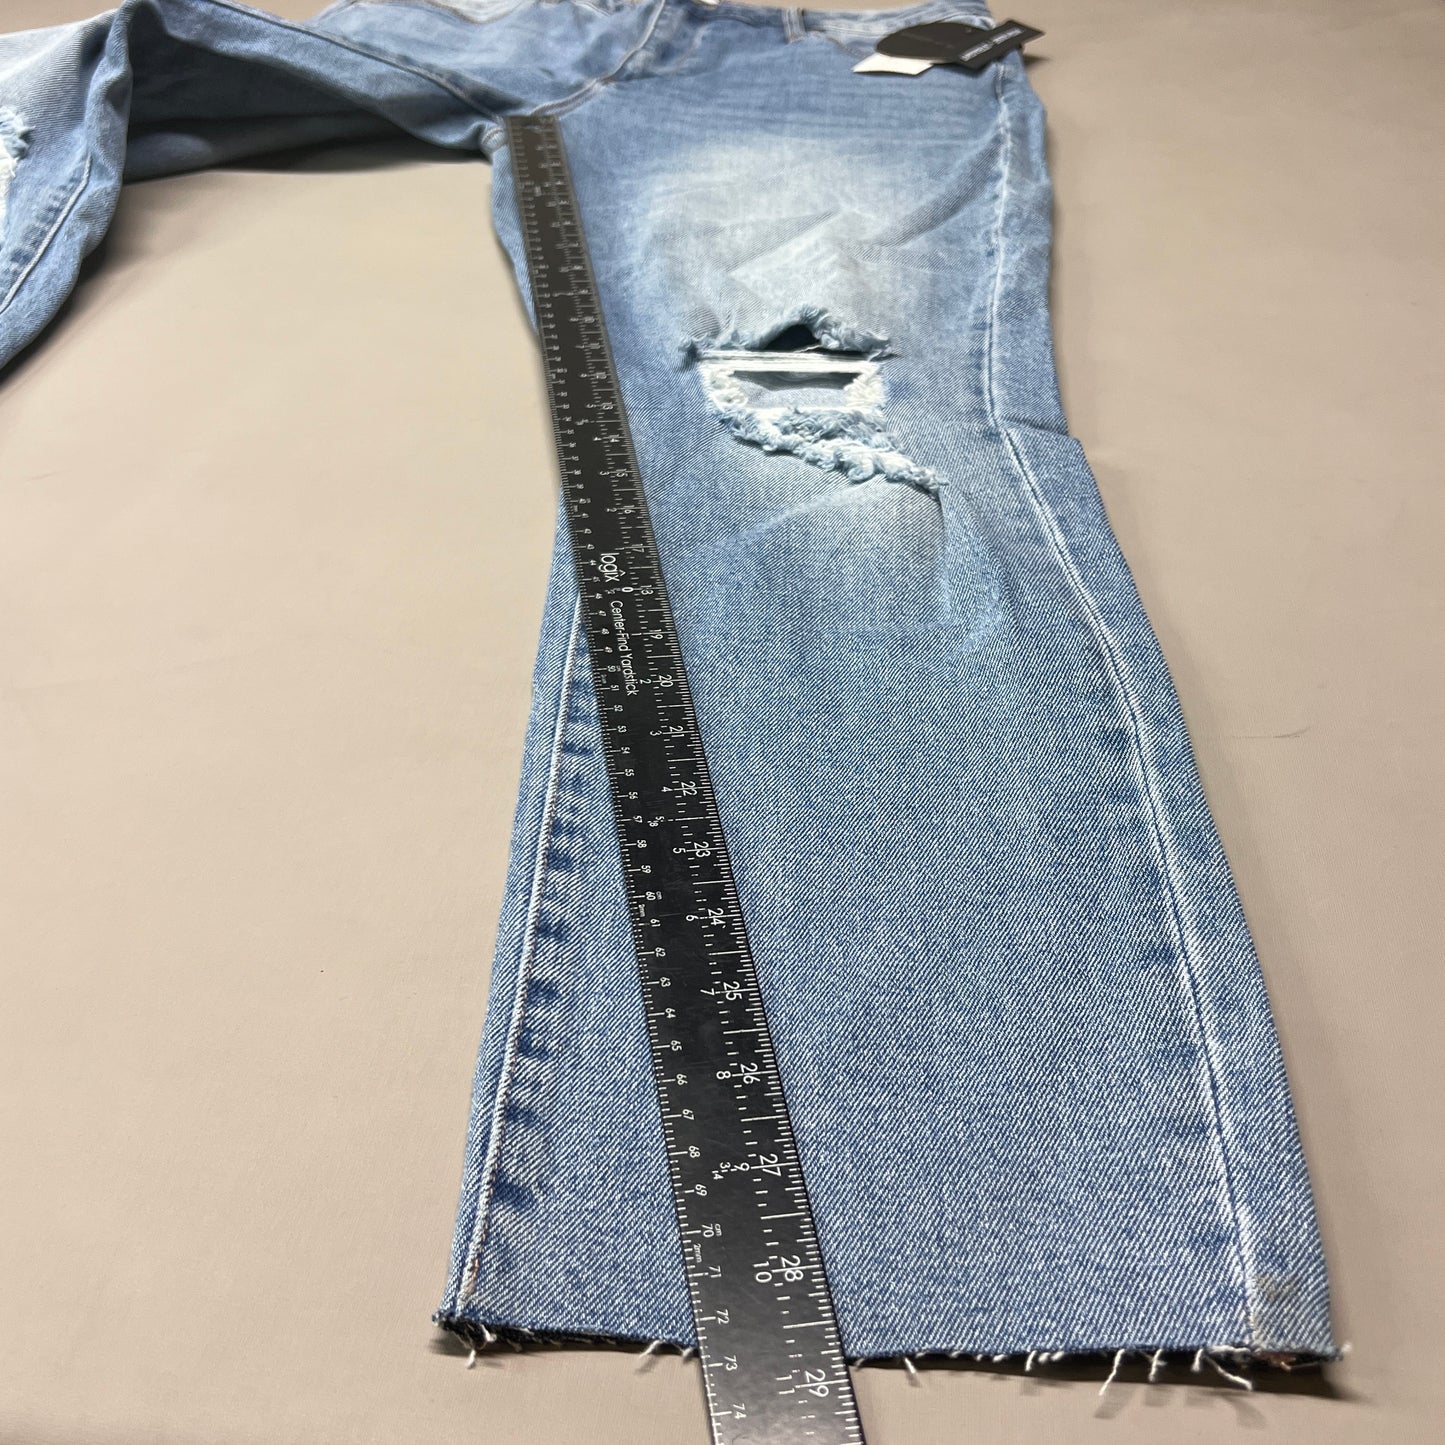 ARTICLES OF SOCIETY Orchidland Ripped Denim Jeans Women's Sz 31 Blue 4009TQ3-717 (New)